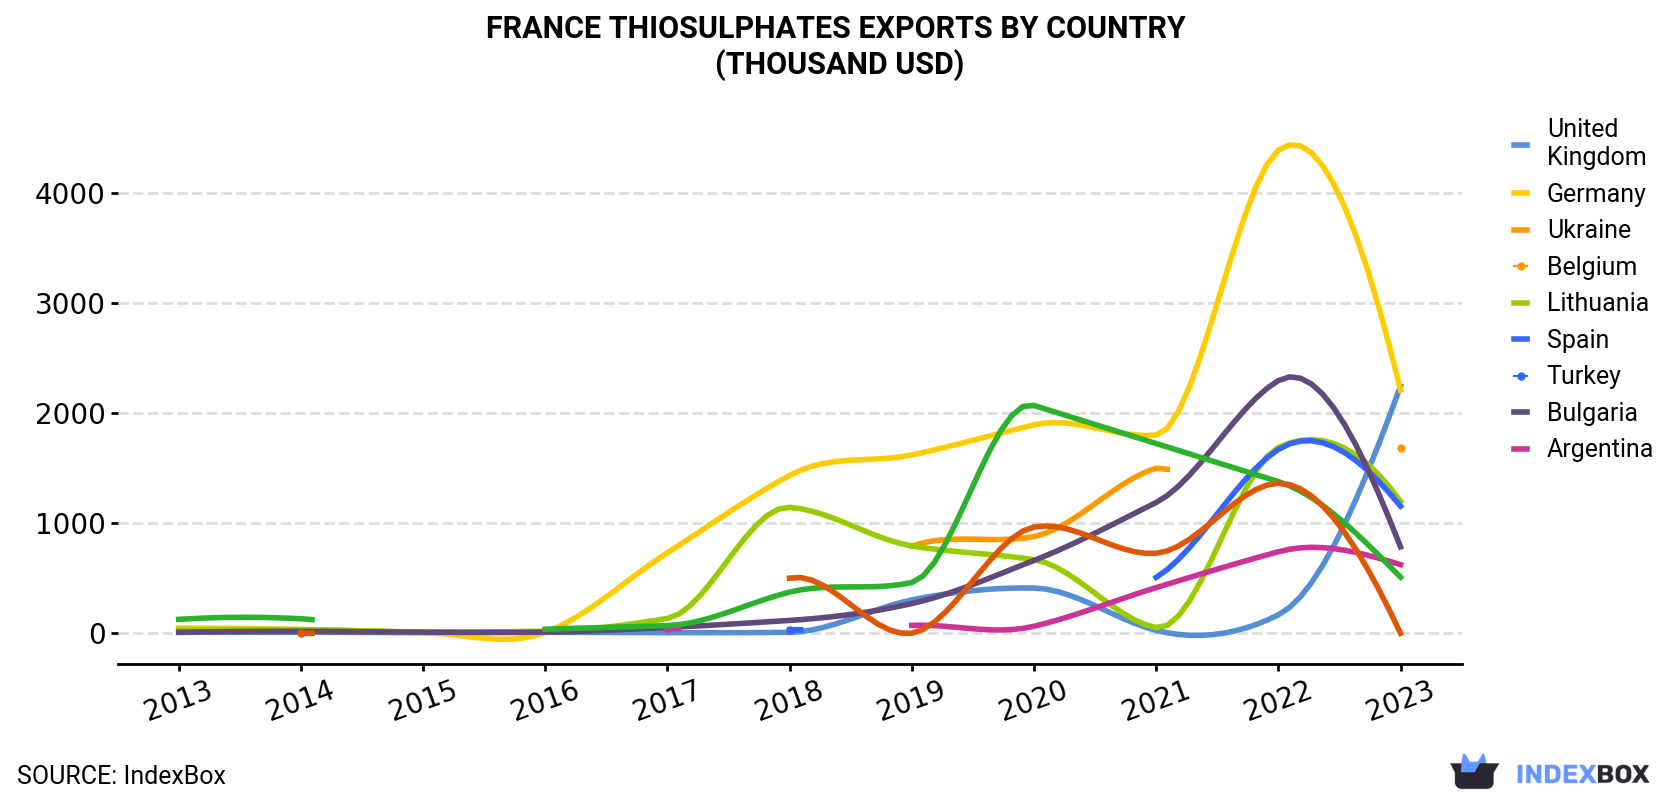 France Thiosulphates Exports By Country (Thousand USD)